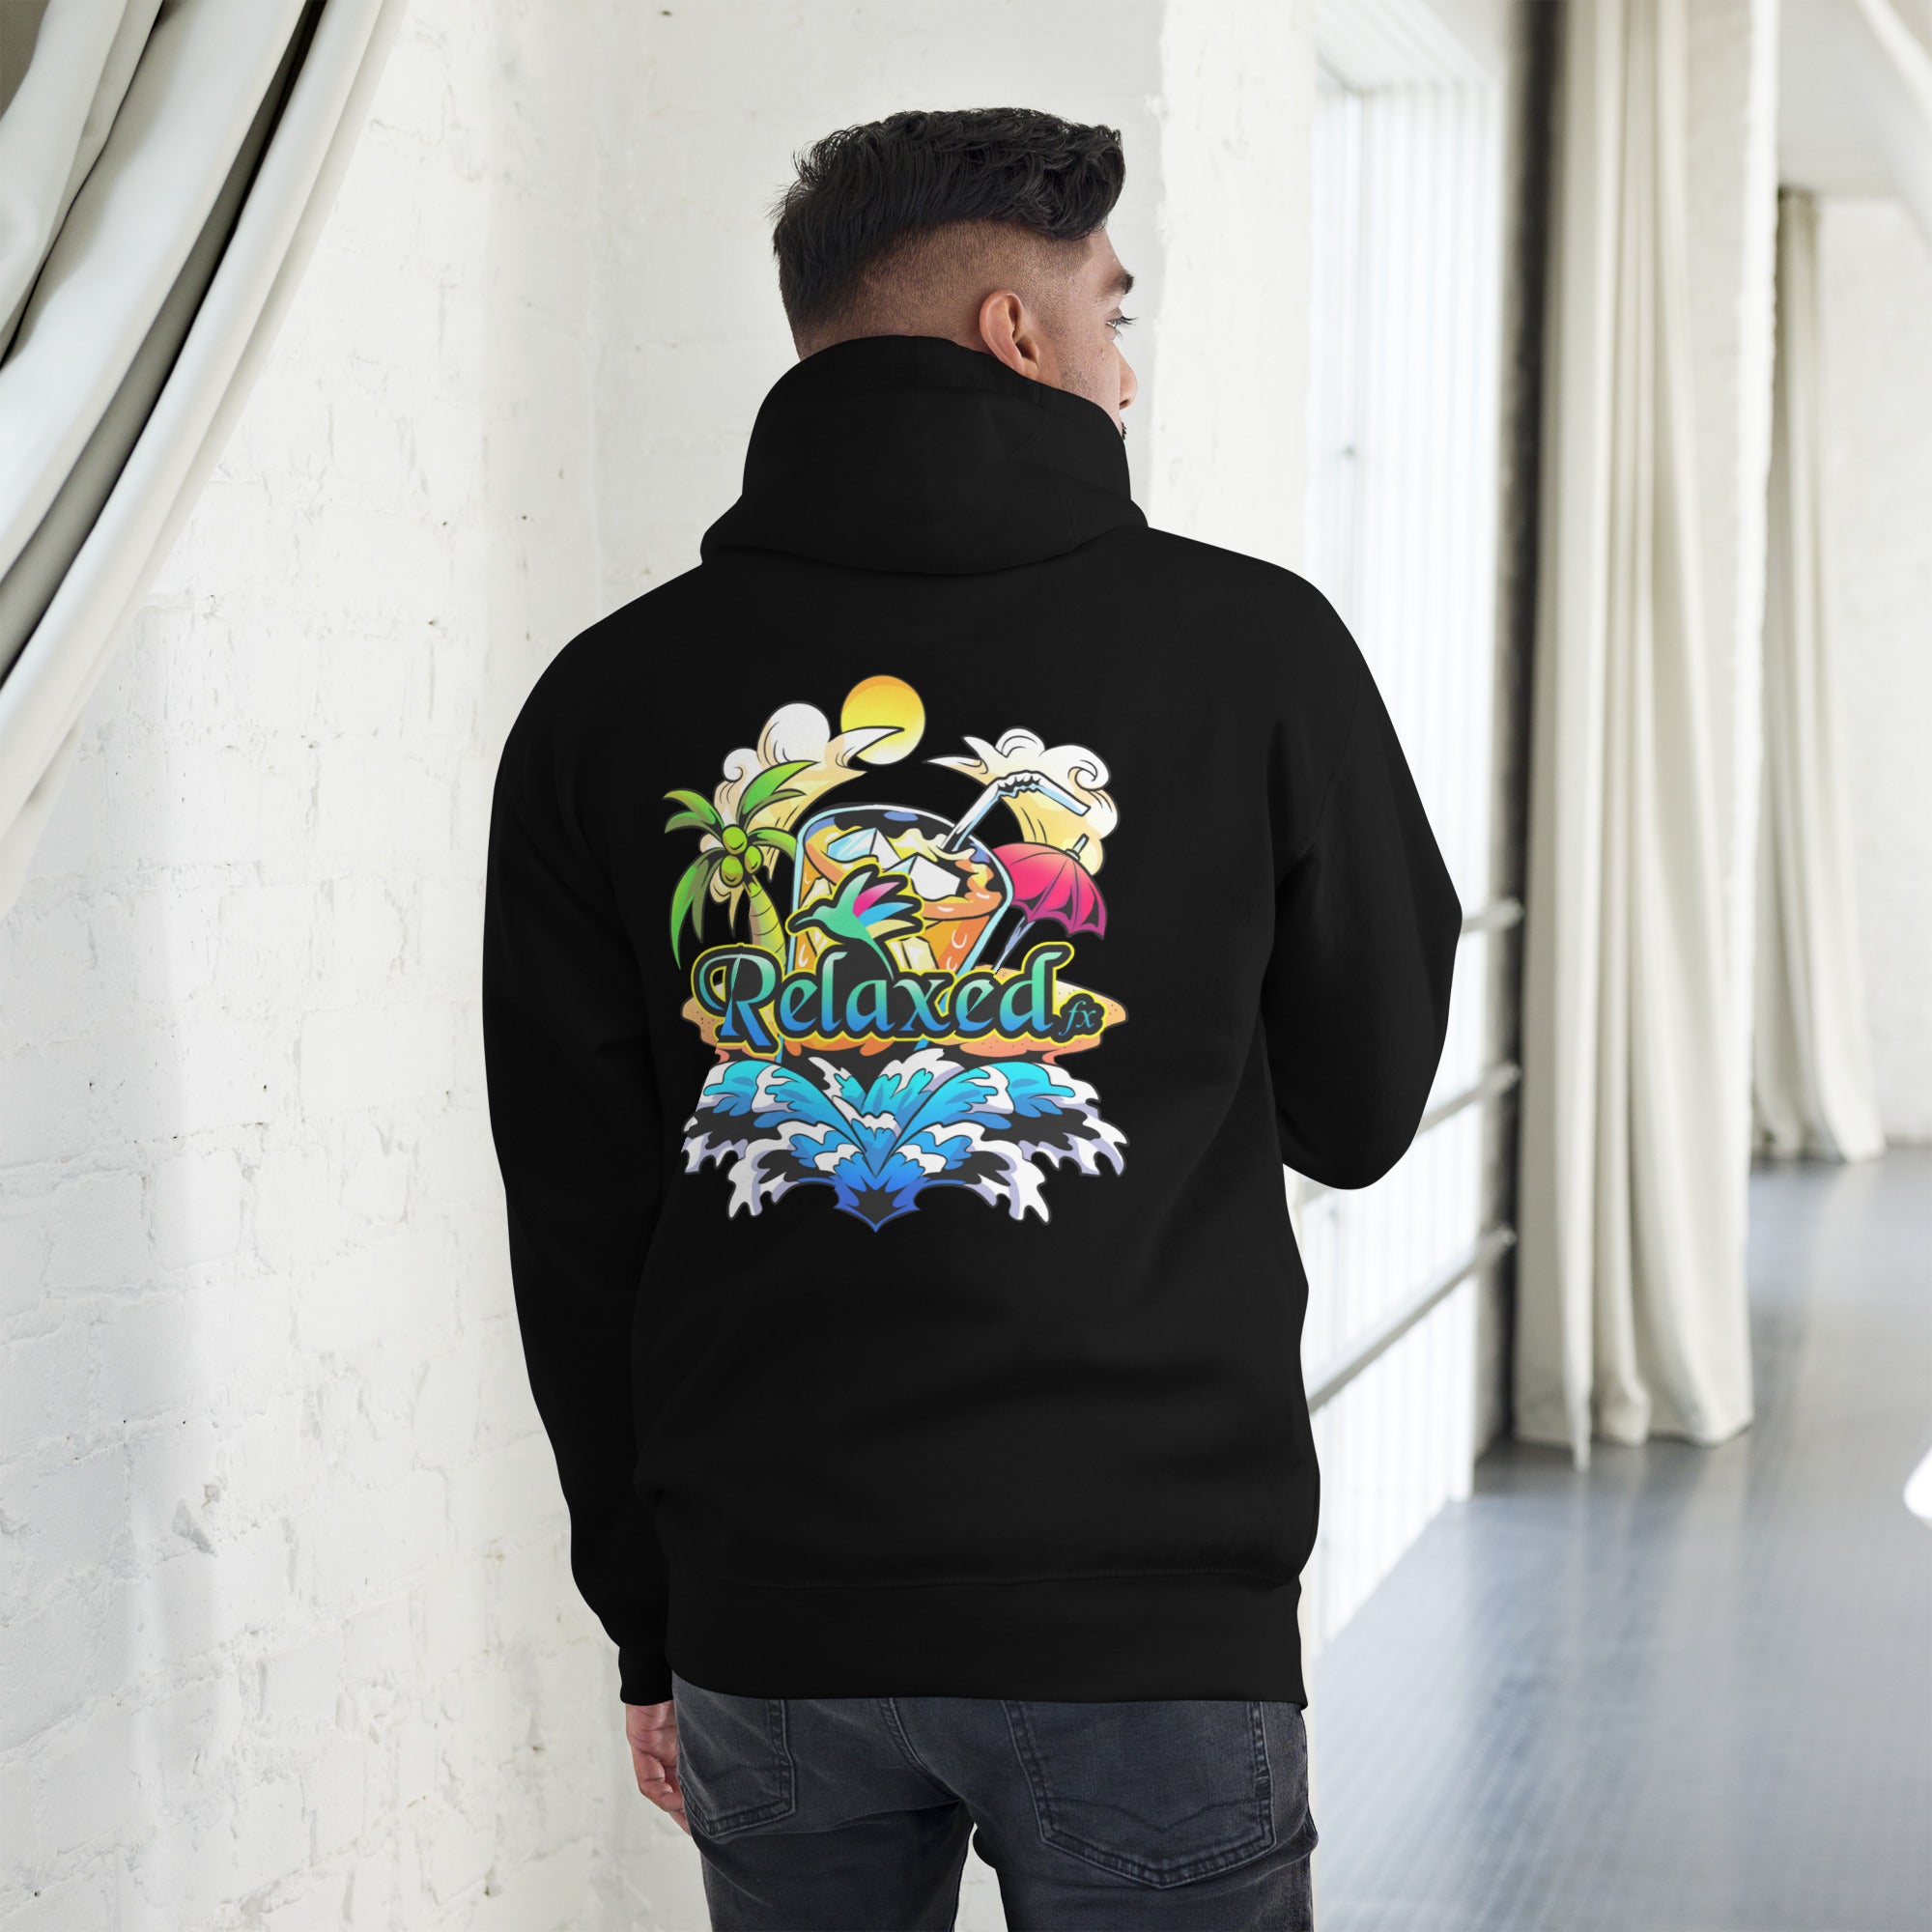 Relaxedfx Vibes Hoodie